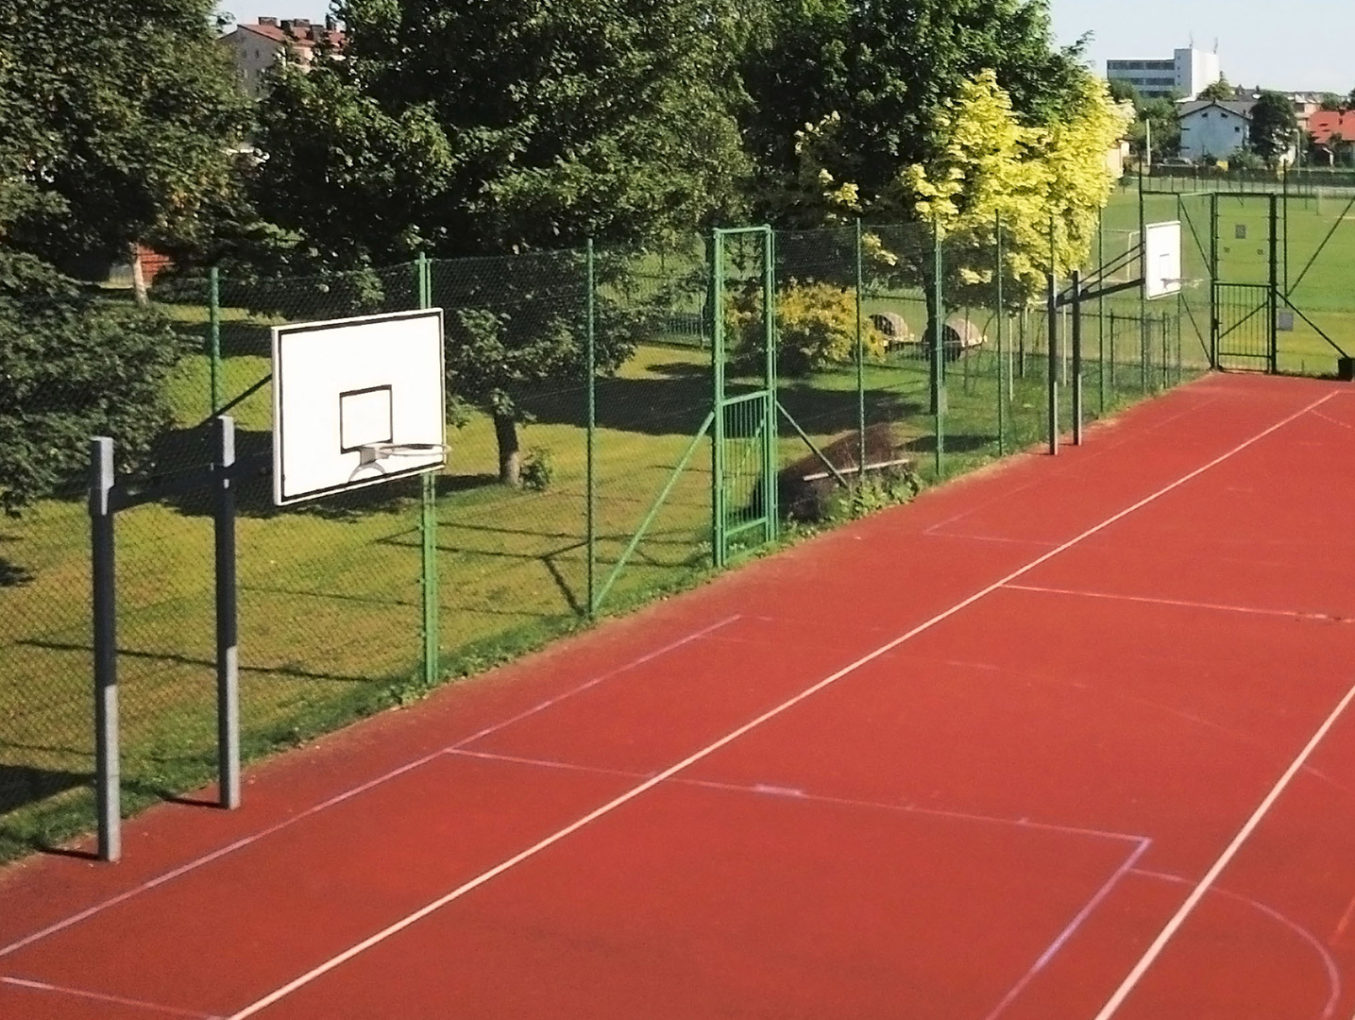 Fence supply and install for basketball courts Brisbane